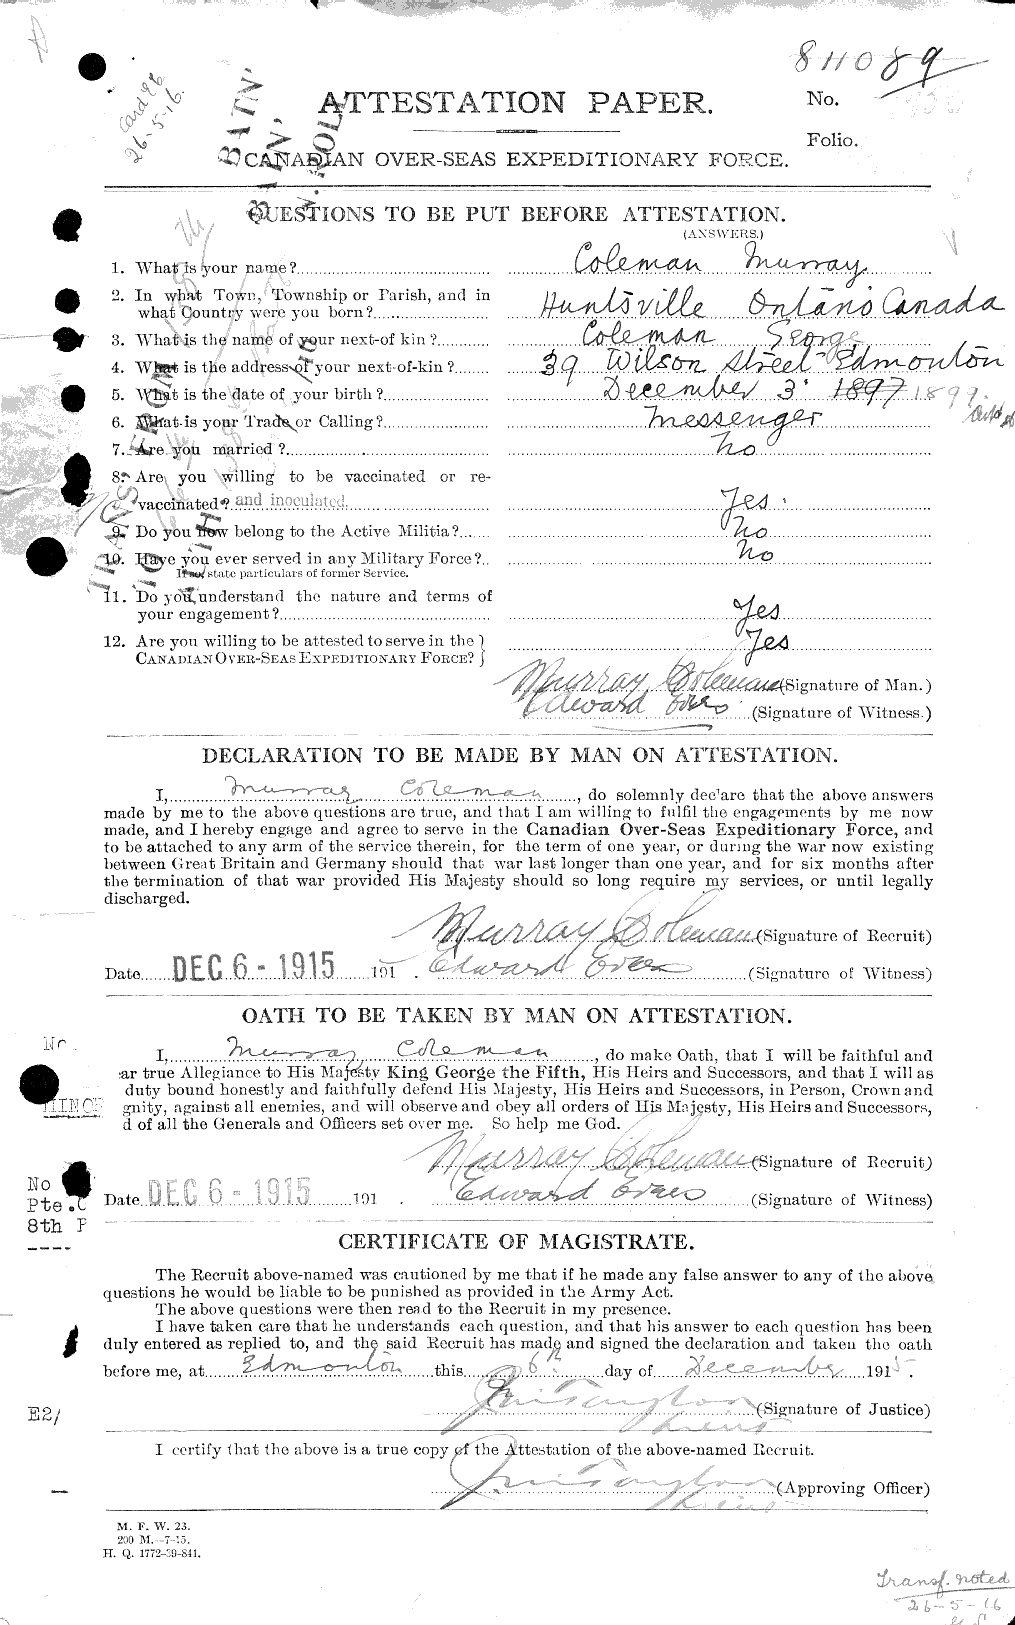 Personnel Records of the First World War - CEF 028243a